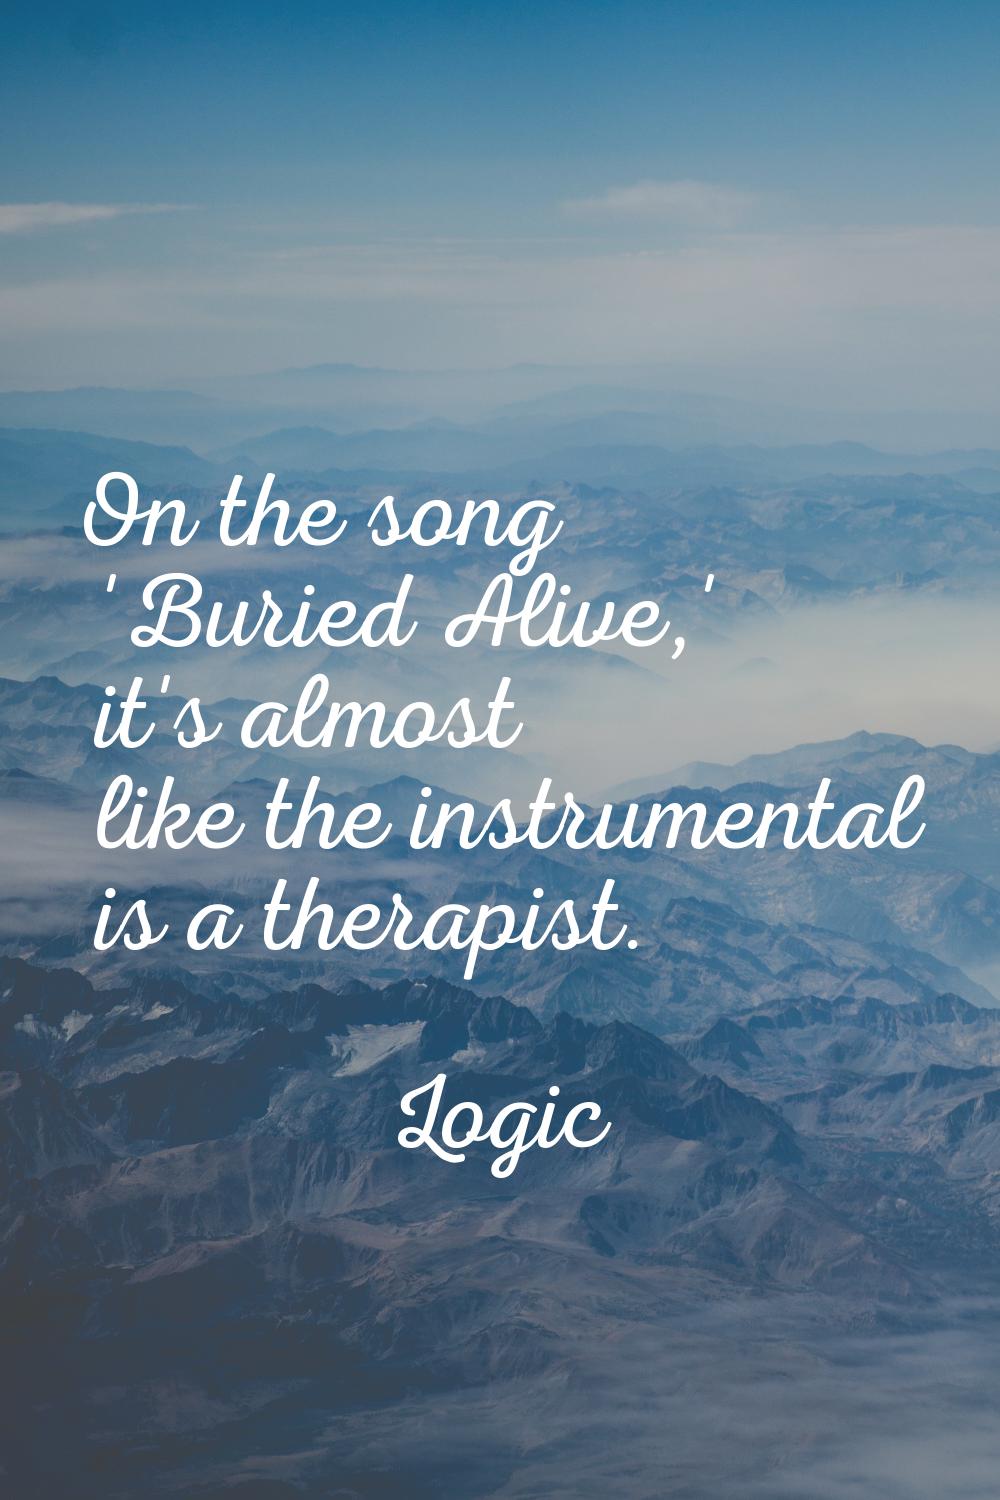 On the song 'Buried Alive,' it's almost like the instrumental is a therapist.